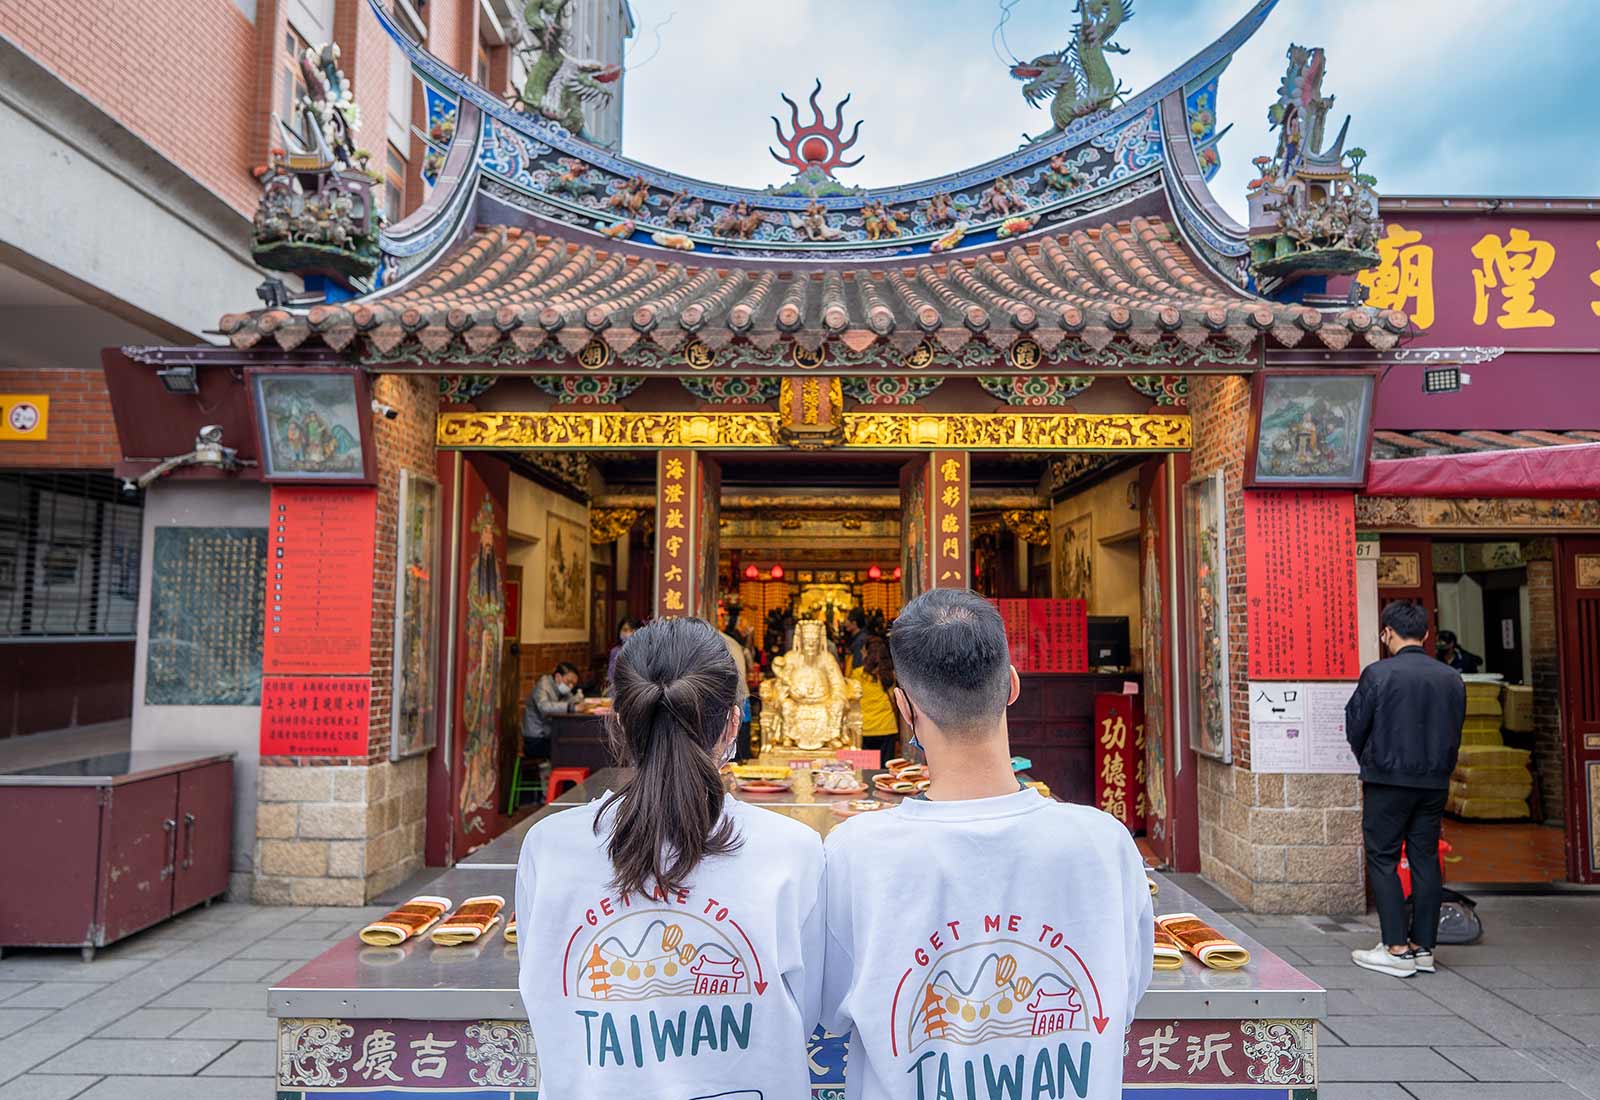 Two tourists appreciate the colorful facade of a narrow one-story temple on Dihua Old Street.